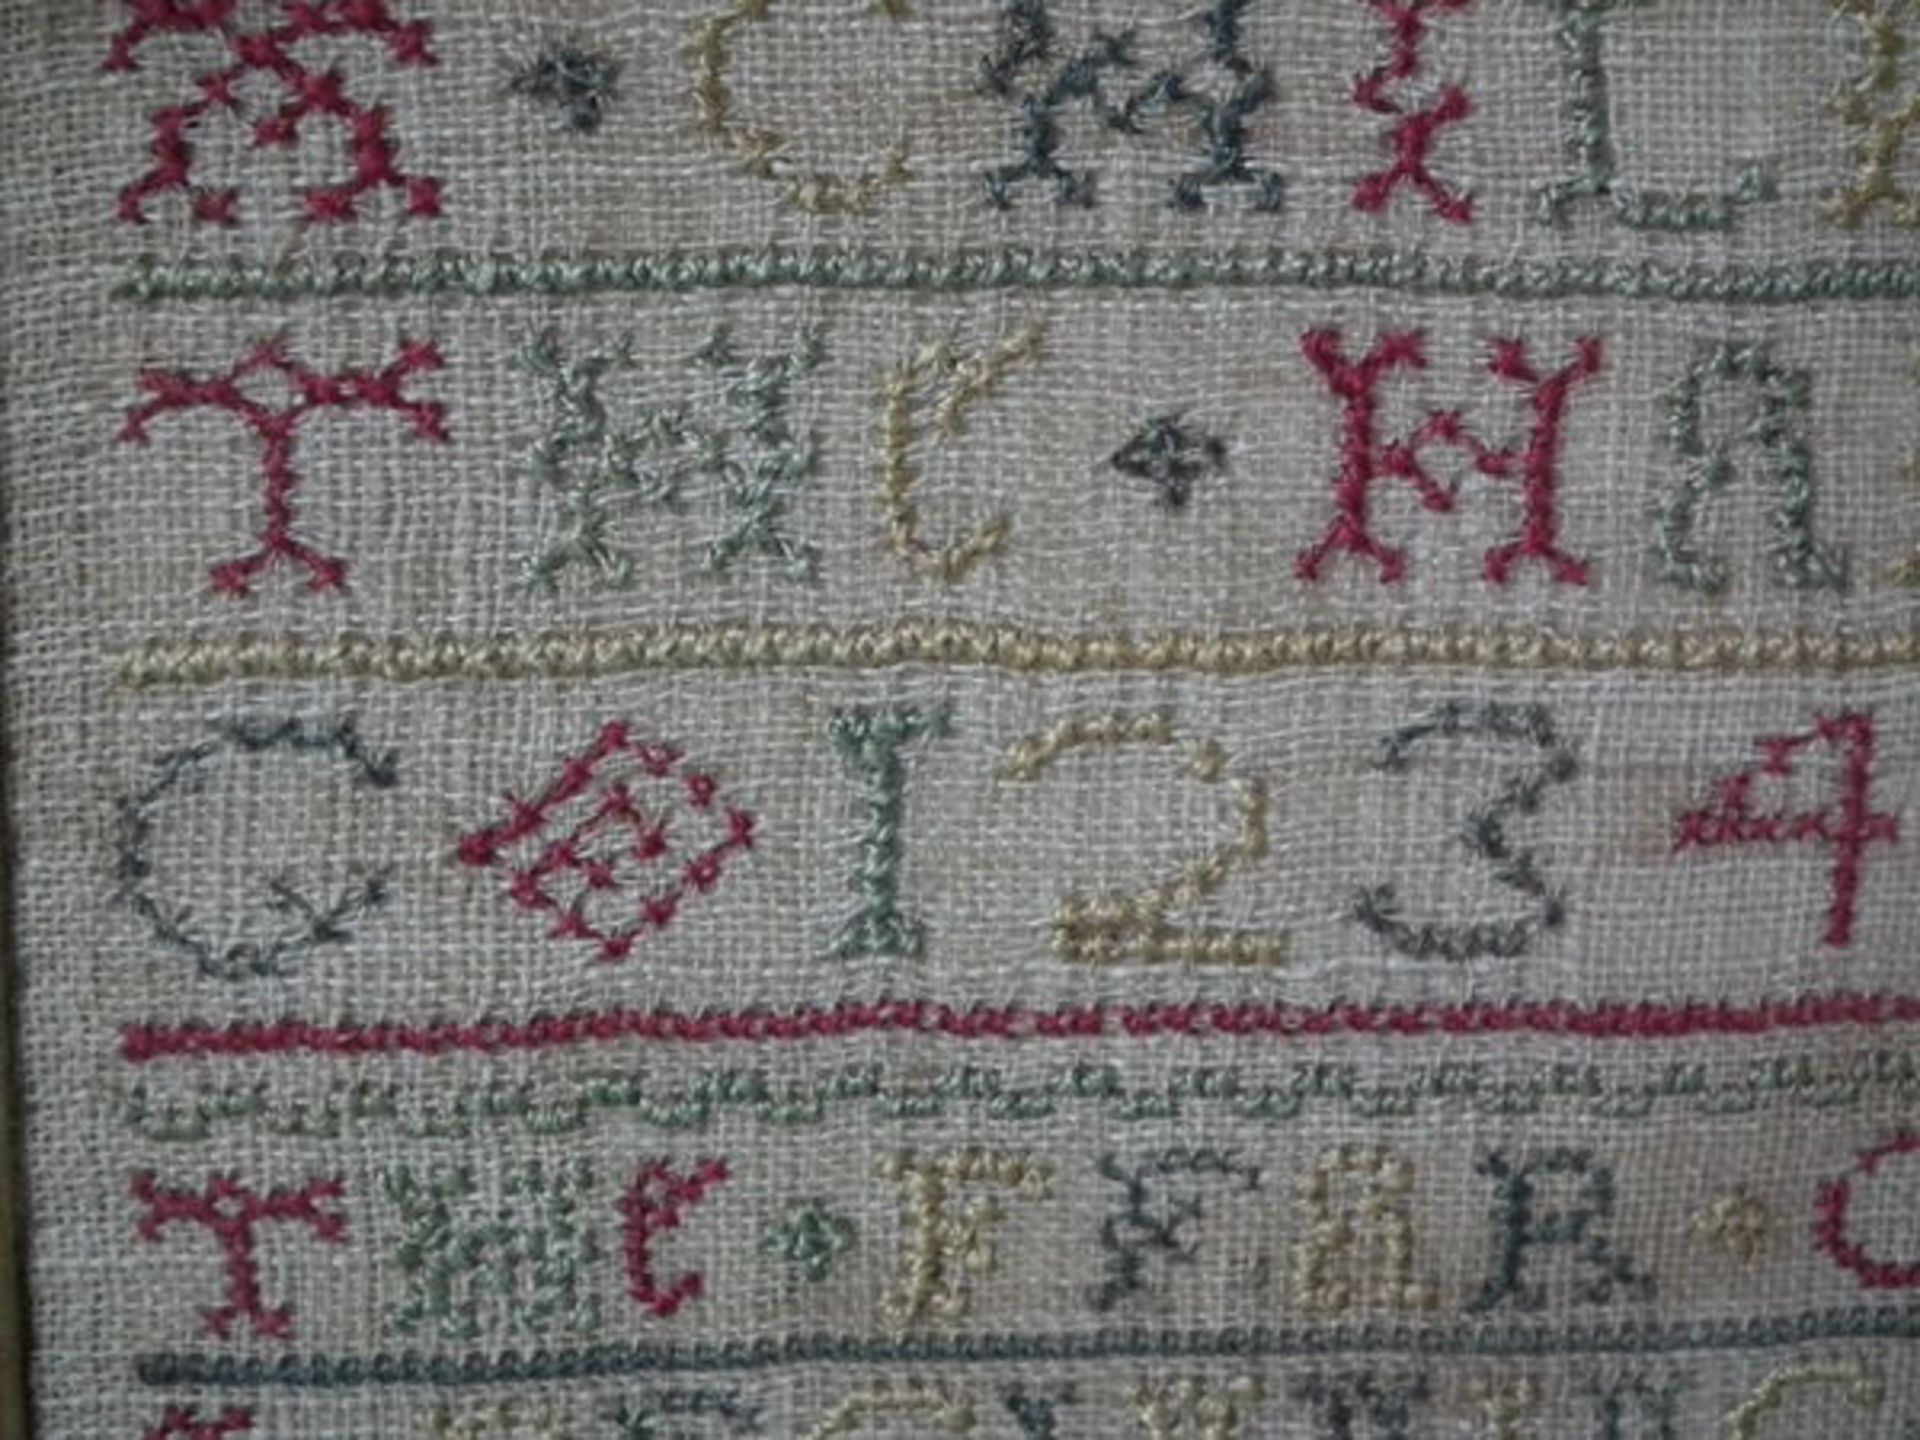 Needlework Band Sampler dated 1724 by Ann Wooding - FREE UK DELIVERY - Image 16 of 20